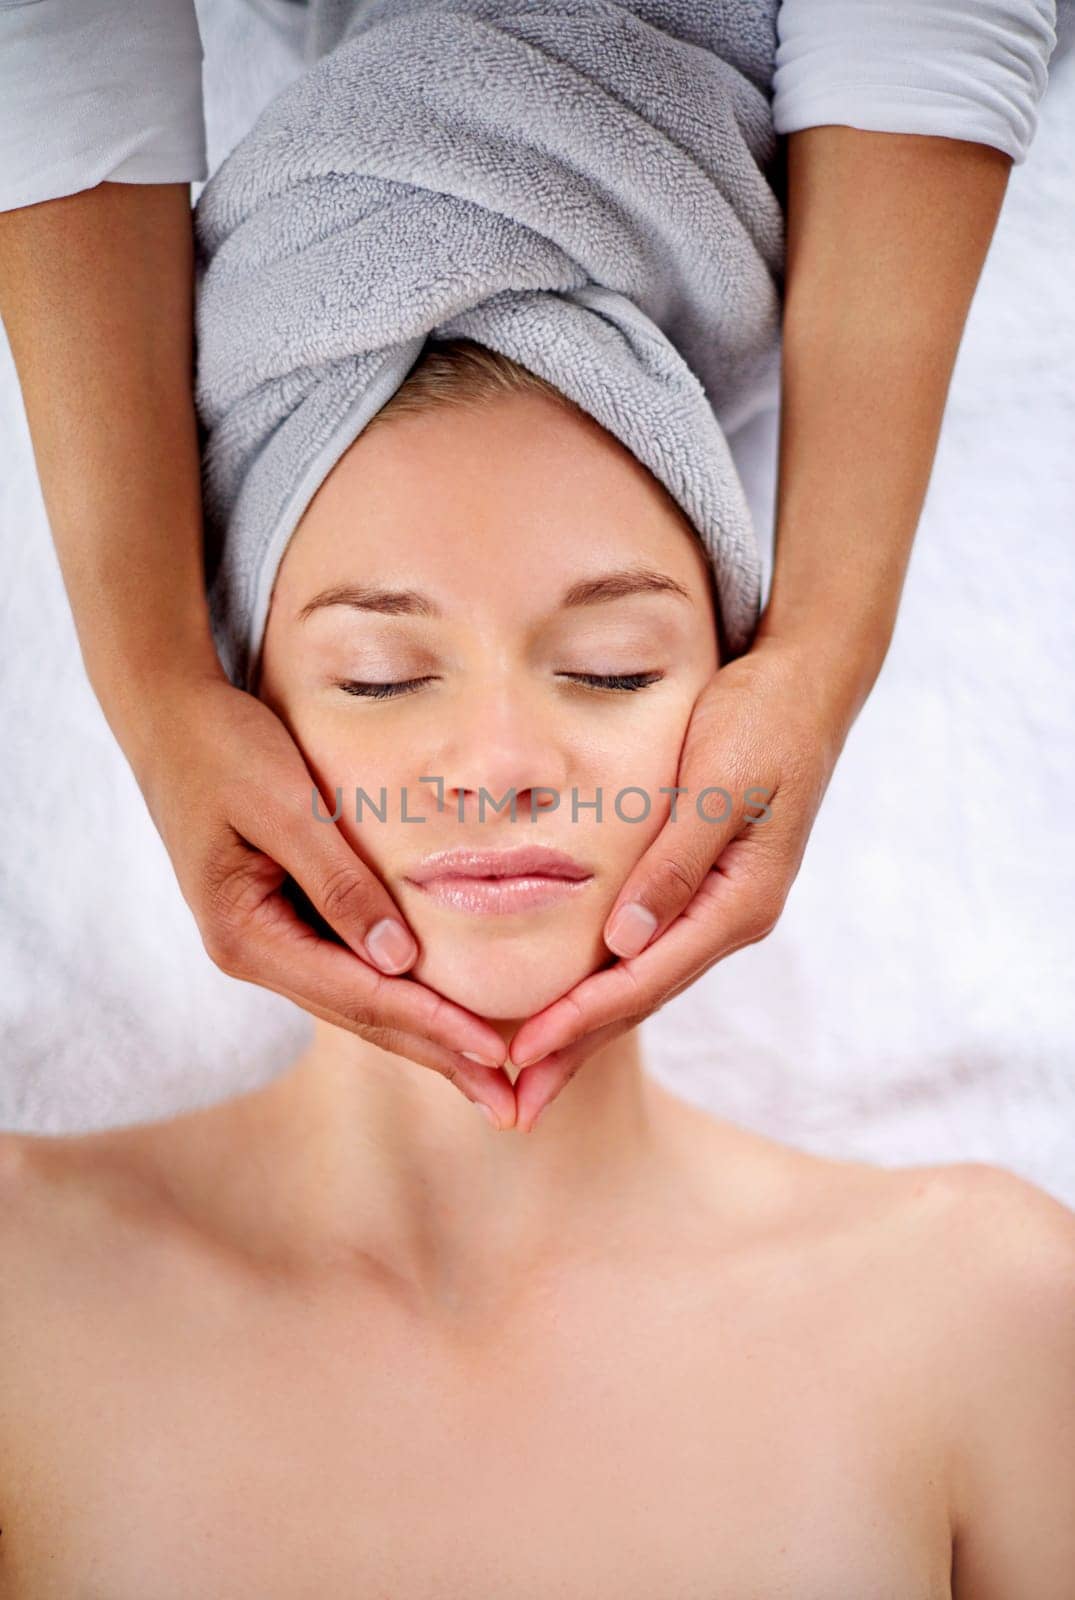 Woman, face and massage table in spa, therapy and self care for beauty salon or wellness and resting. Comfortable and resort with client, stress free and healing, calm session and cosmetology.